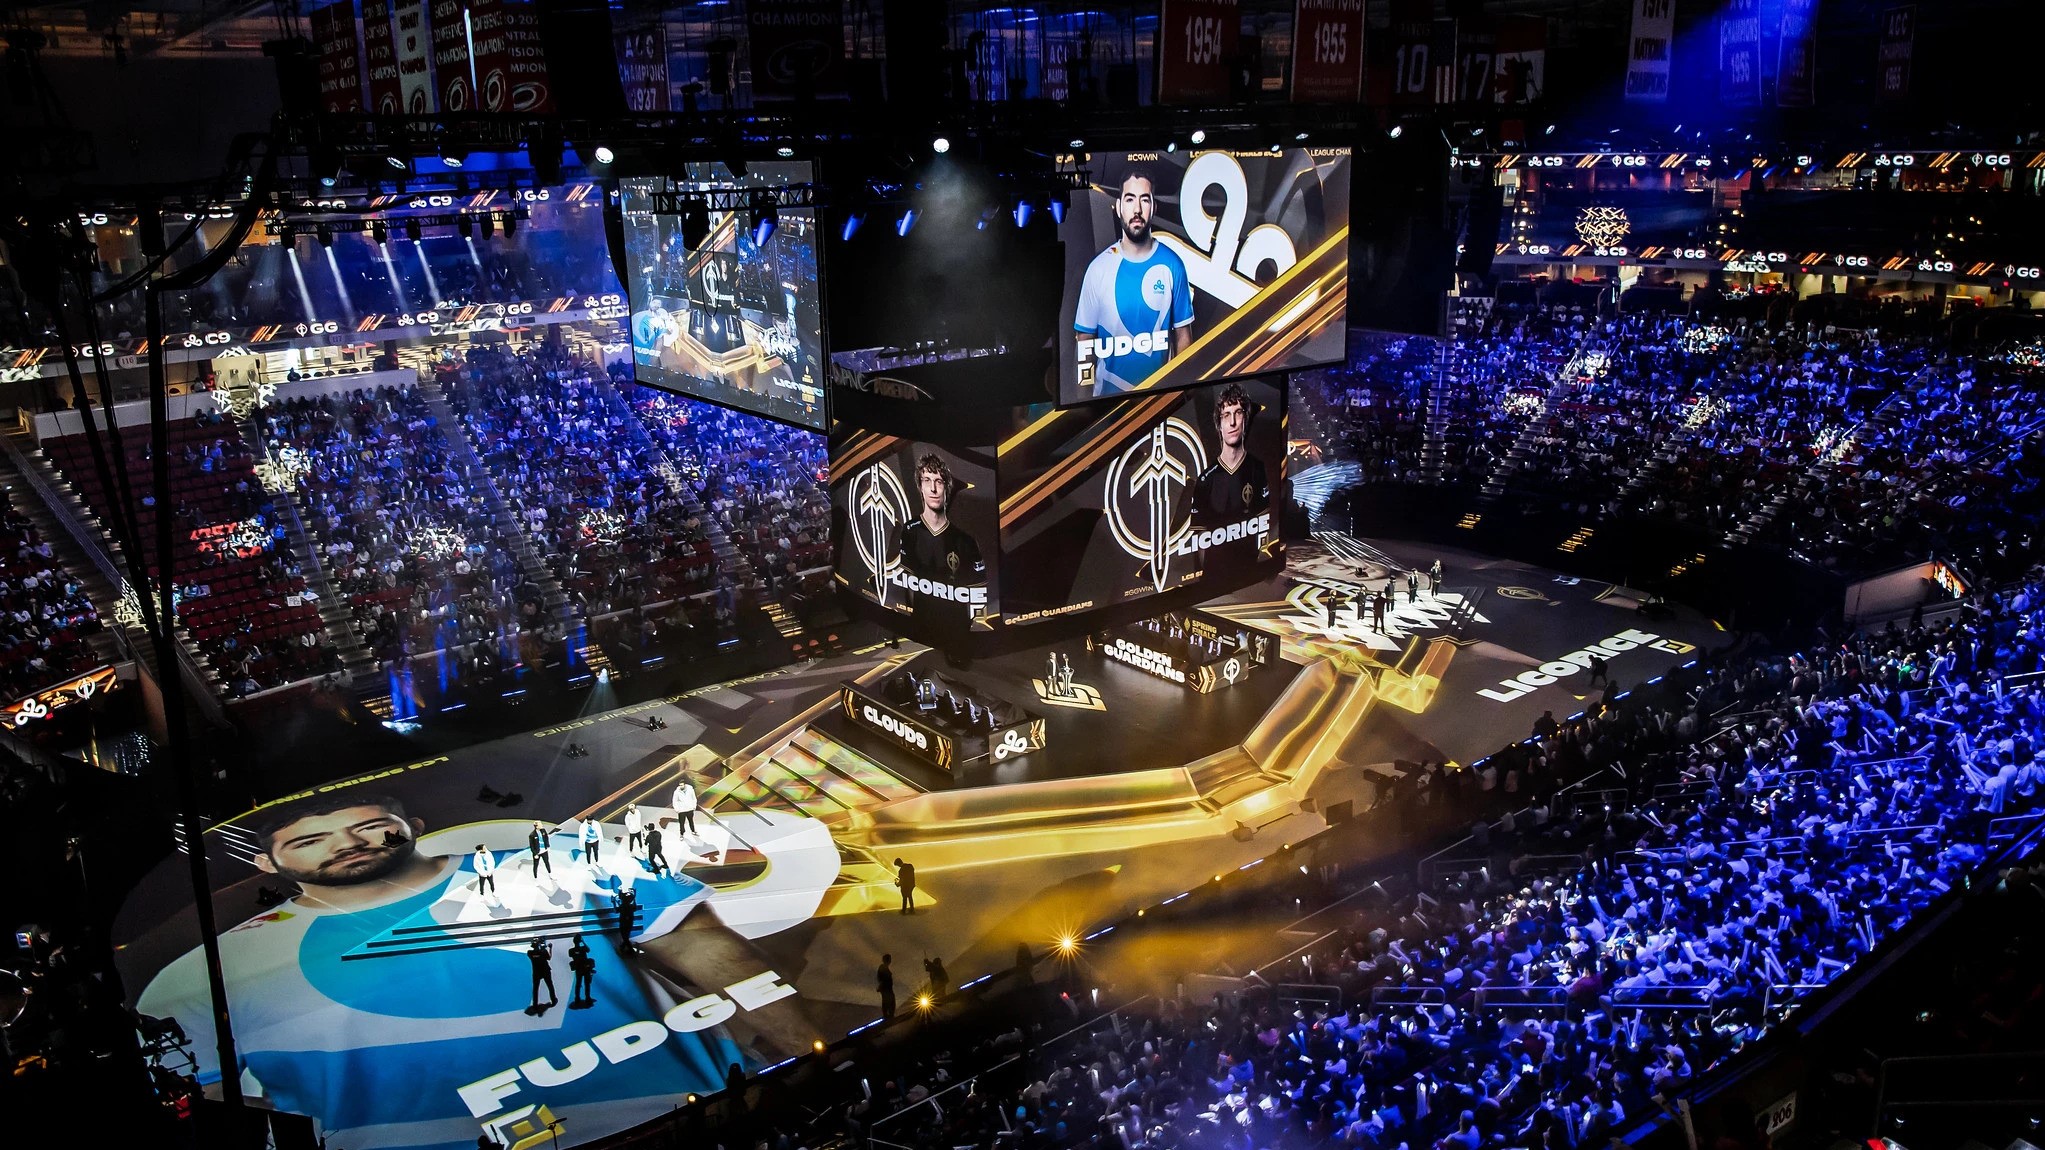 How to watch the 2022 League of Legends World Championship - The Verge